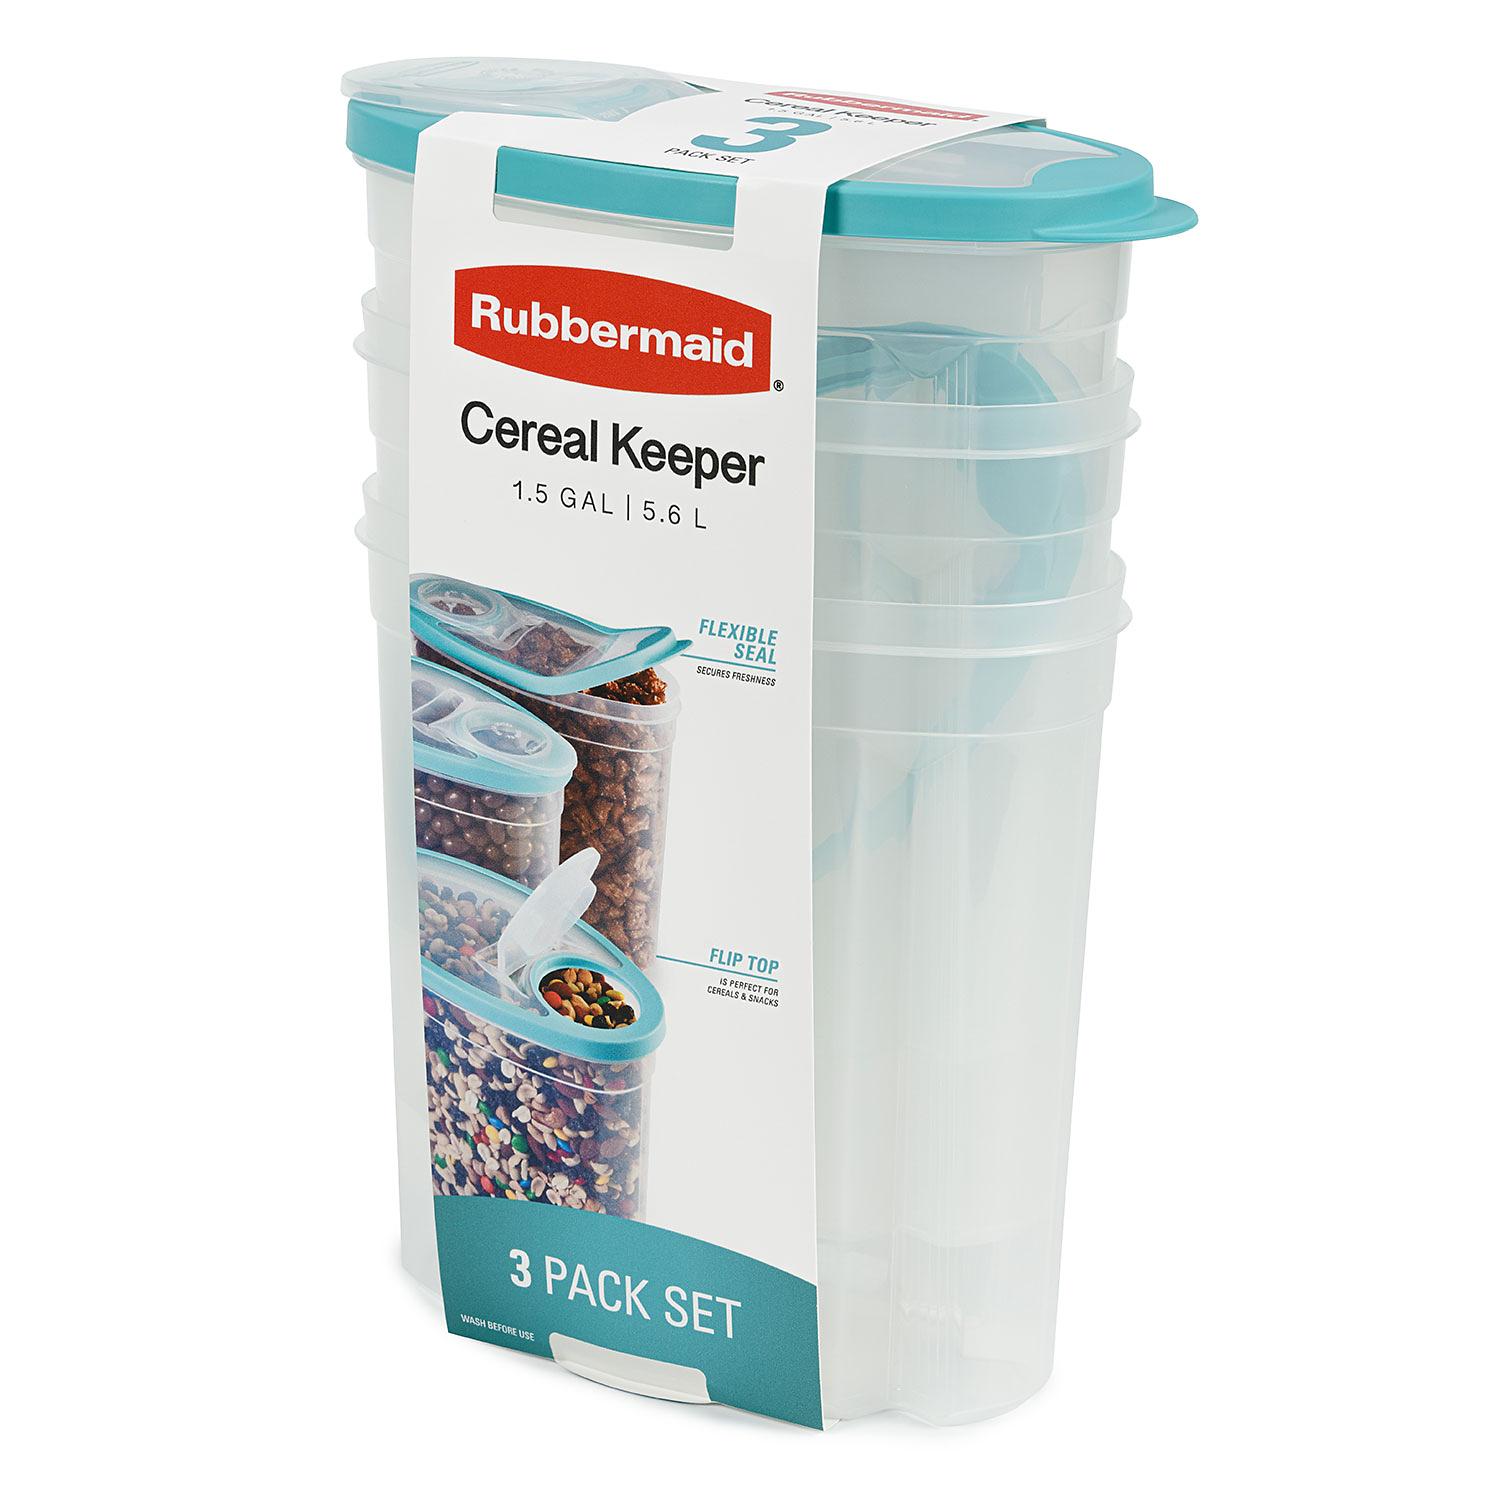 Rubbermaid Cereal Keeper Container, 1.5-Gallon